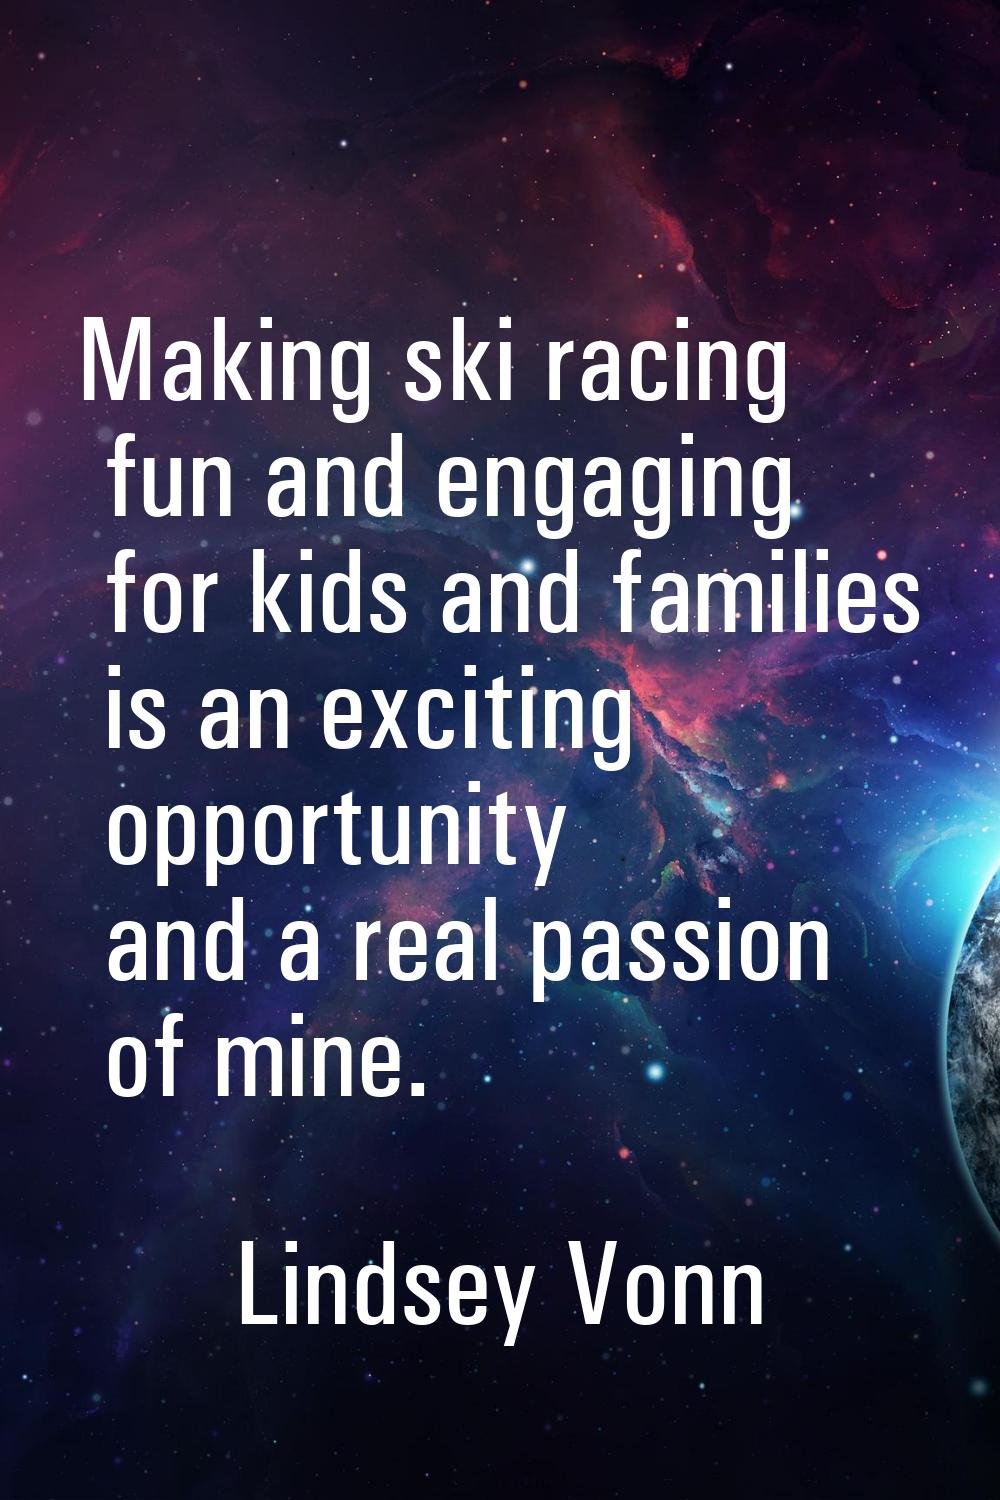 Making ski racing fun and engaging for kids and families is an exciting opportunity and a real pass